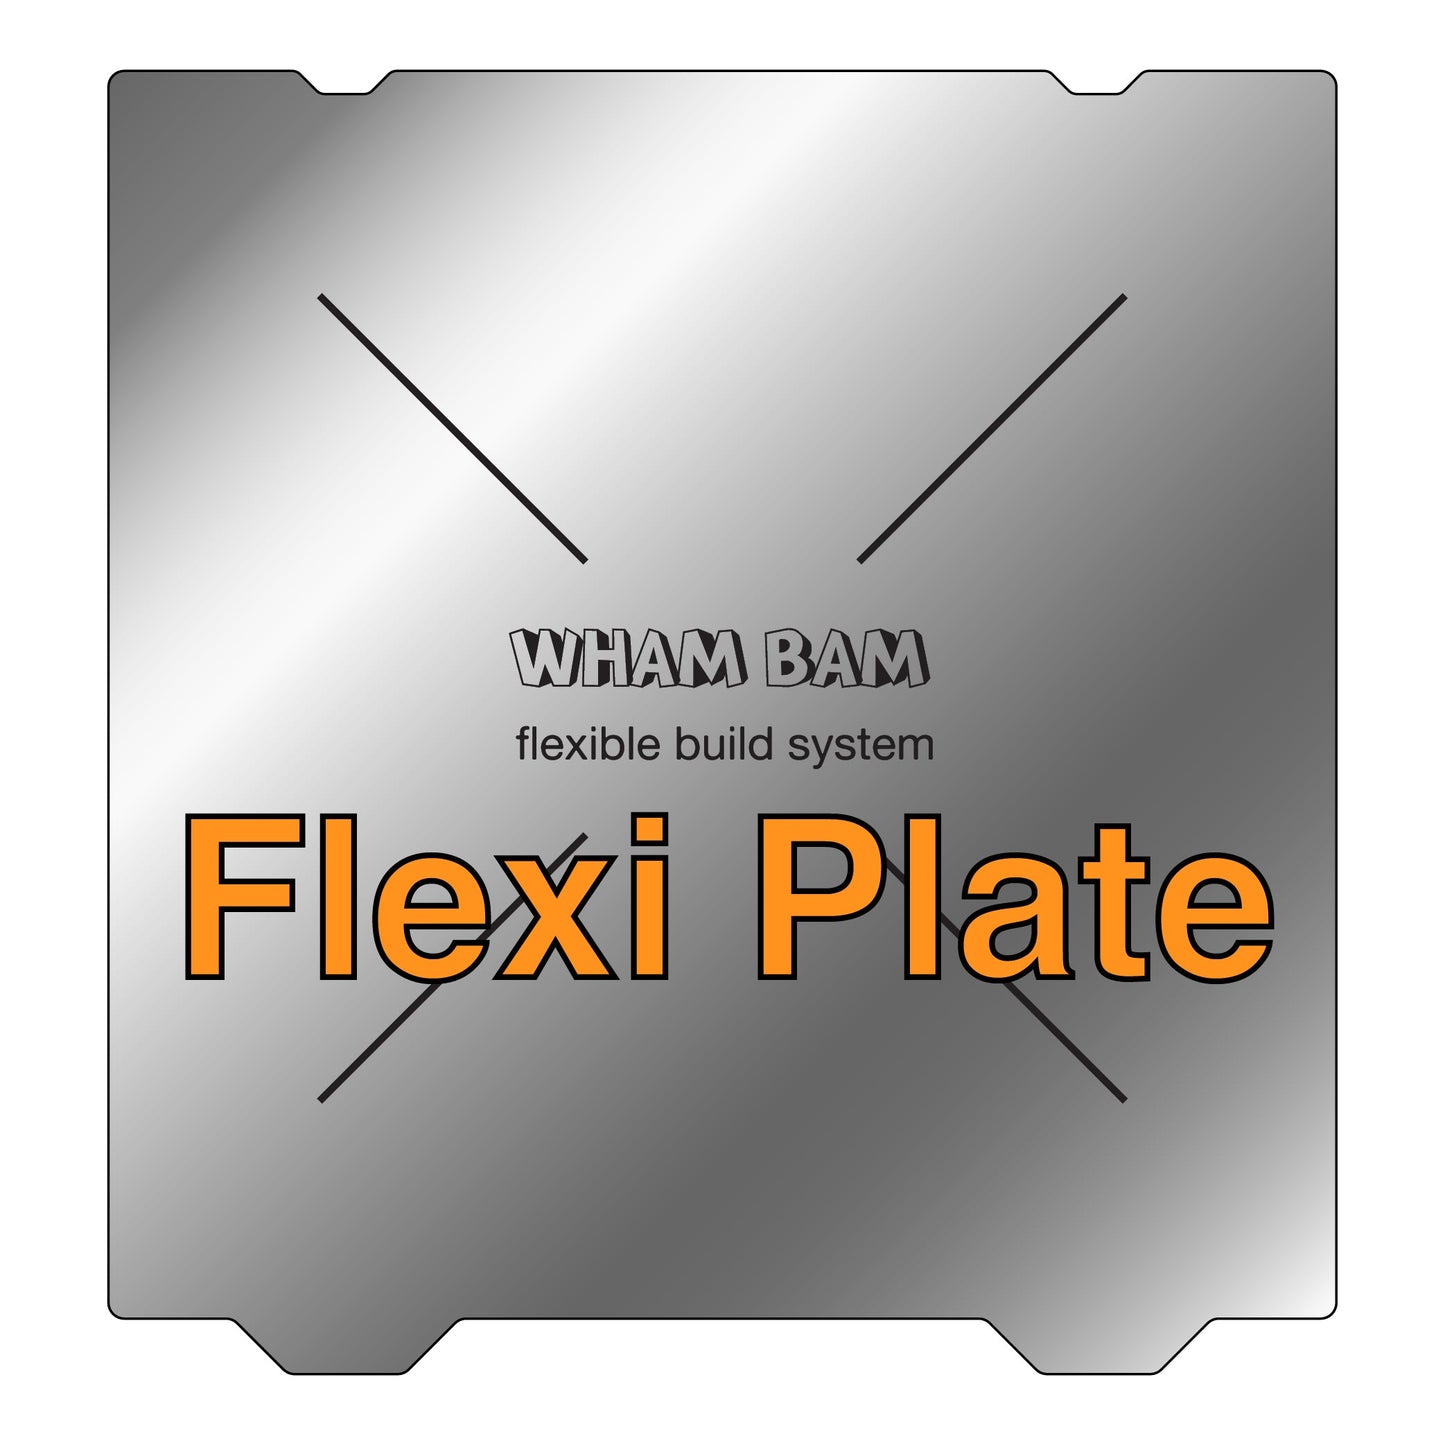 Flexi Plate Only (No Build Surface) - 315 x 310 - Creality K1 Max, Ender 3 S1 Plus, CR10 Smart Pro